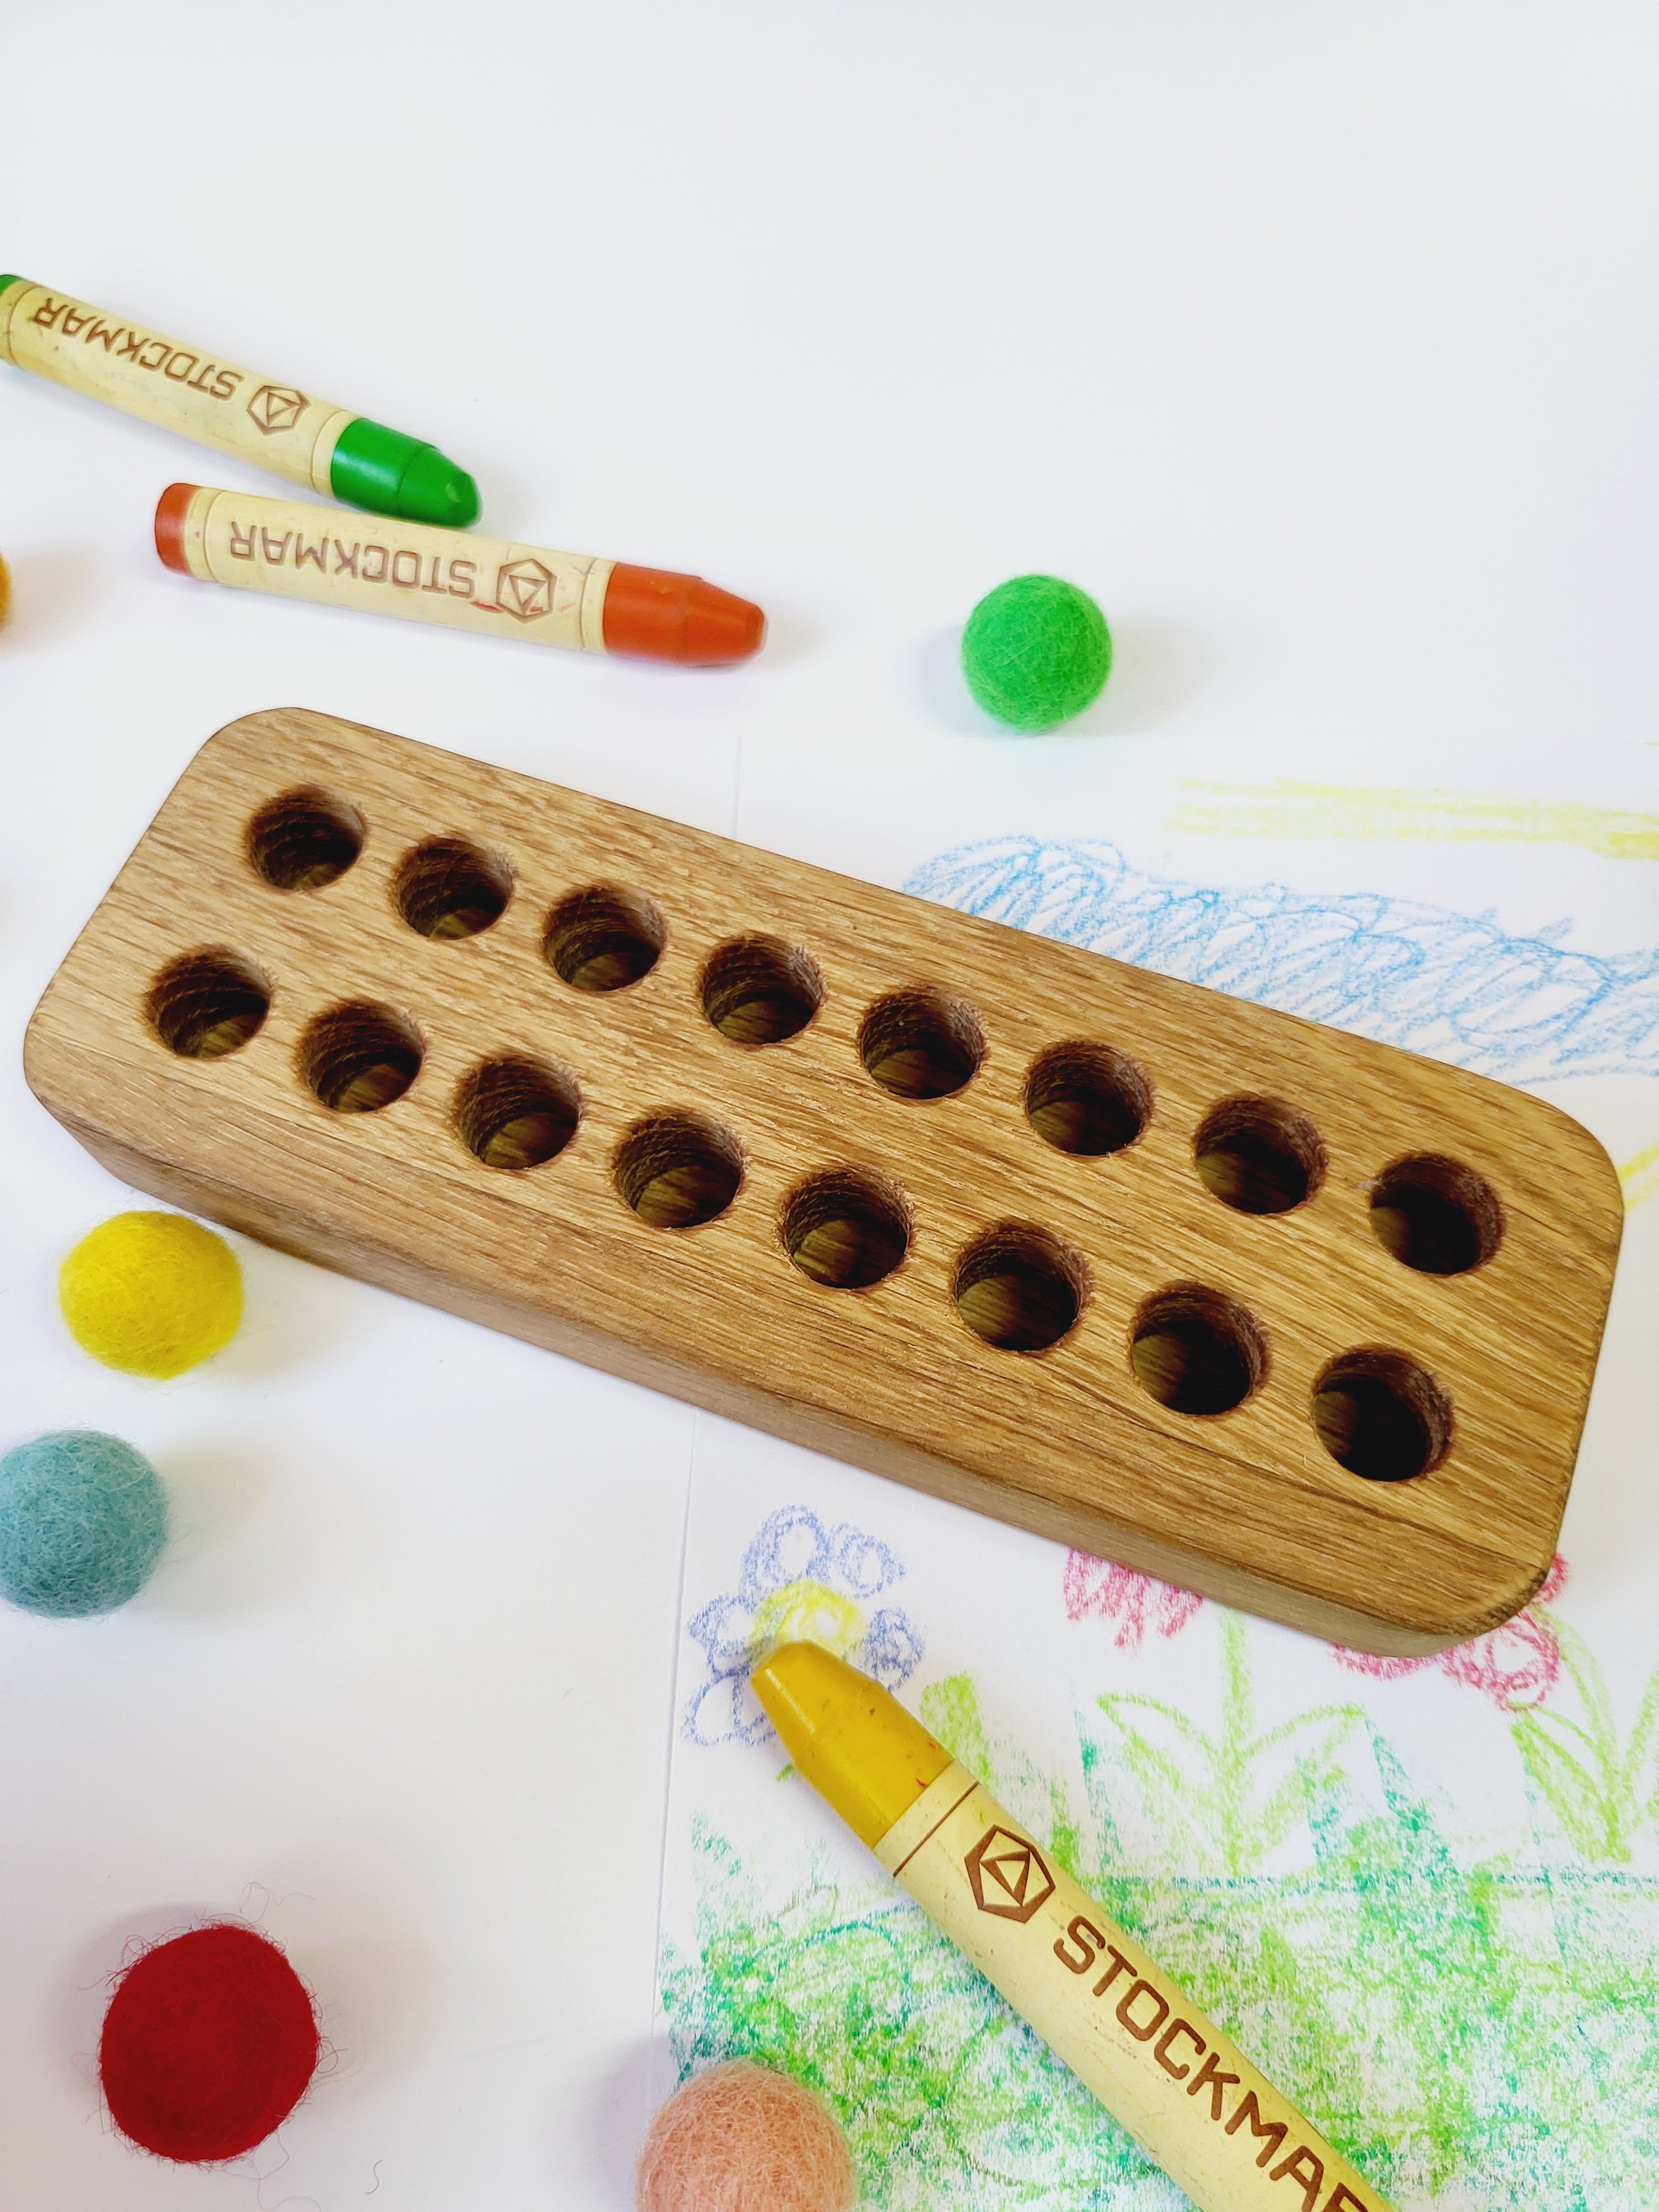 Rectangular crayon holder for 16 sticks, desk organization waldorf school, personalized gift forkids, child form wooden holder without crayons, educational for privat schools